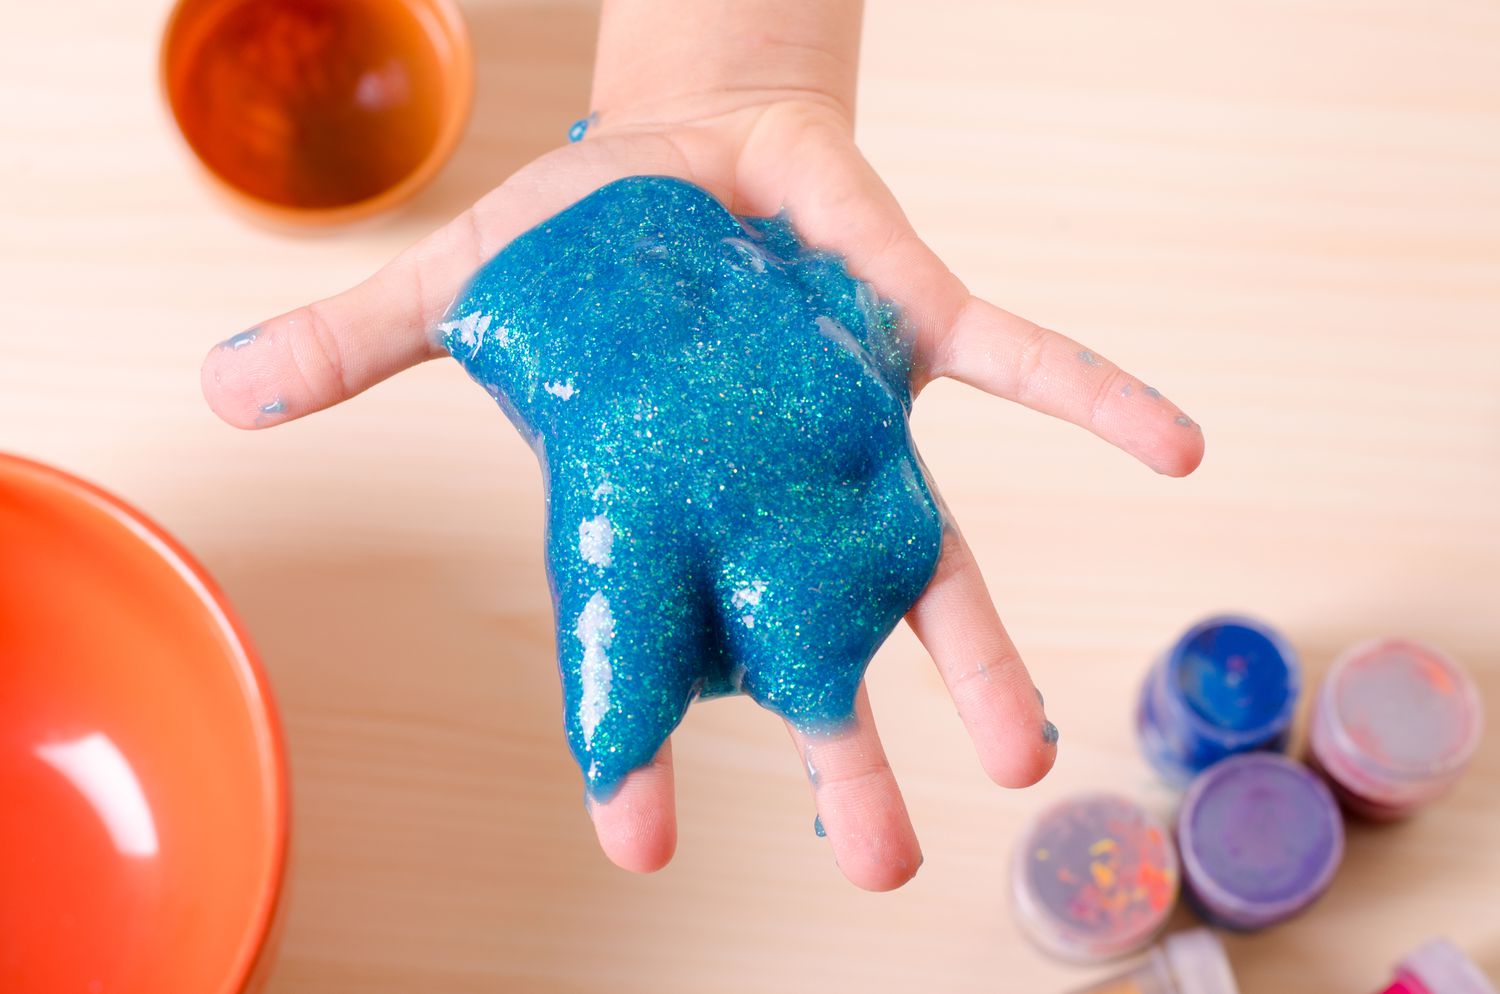 Child's hand holding sparkly blue slime